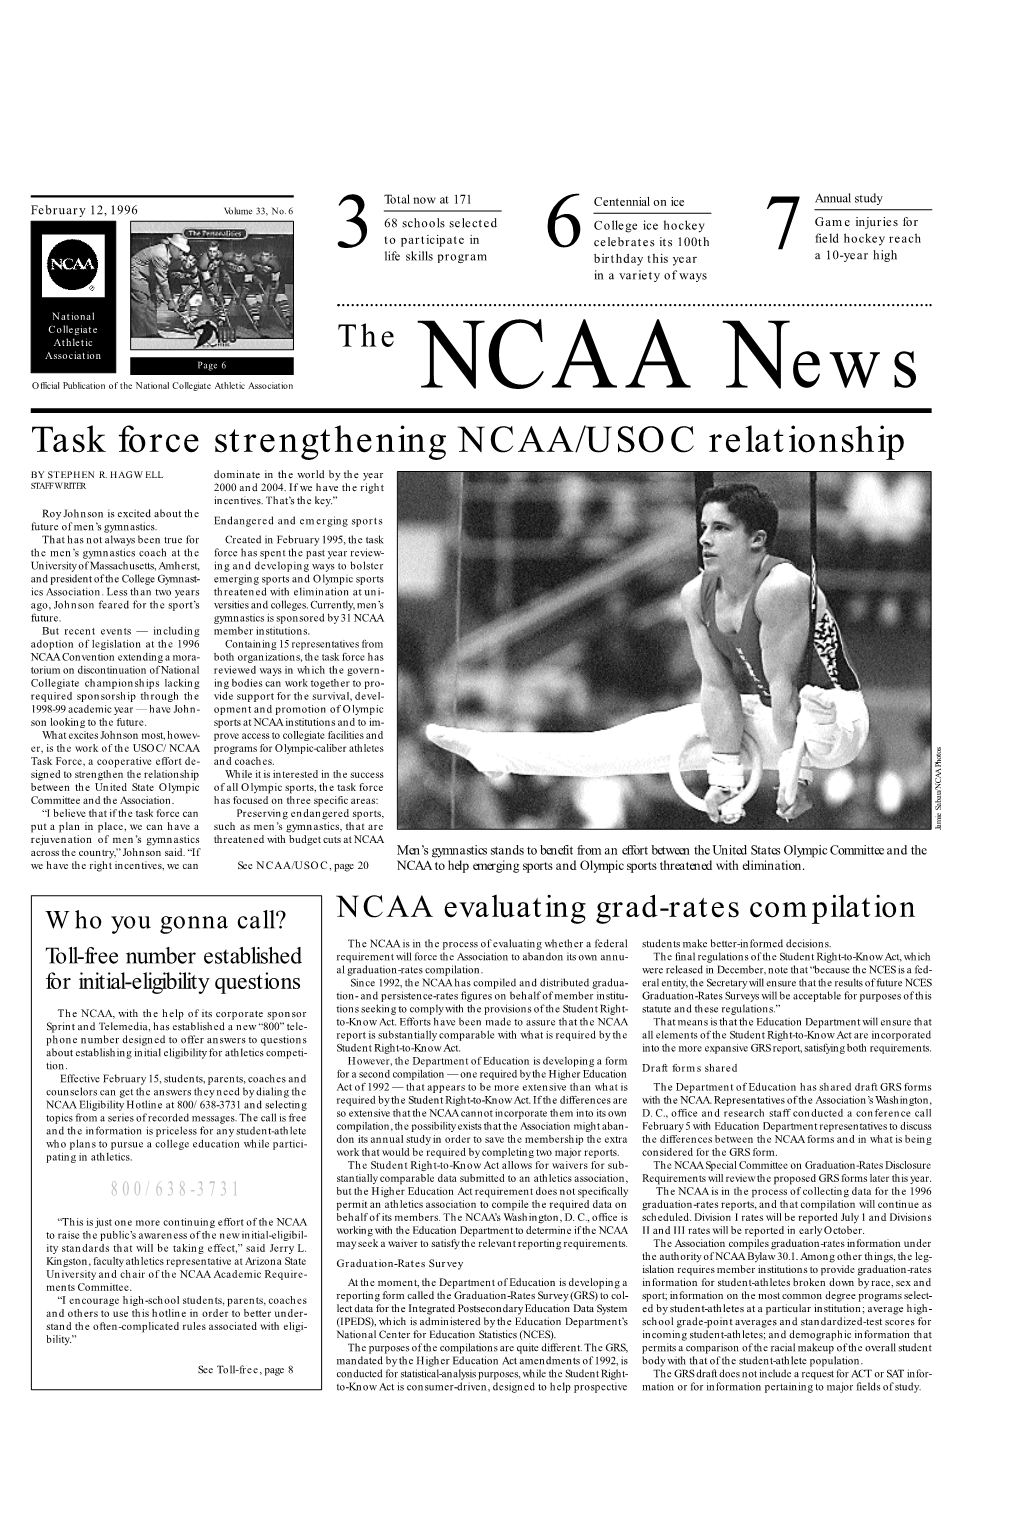 Task Force Strengthening NCAA/USOC Relationship by STEPHEN R